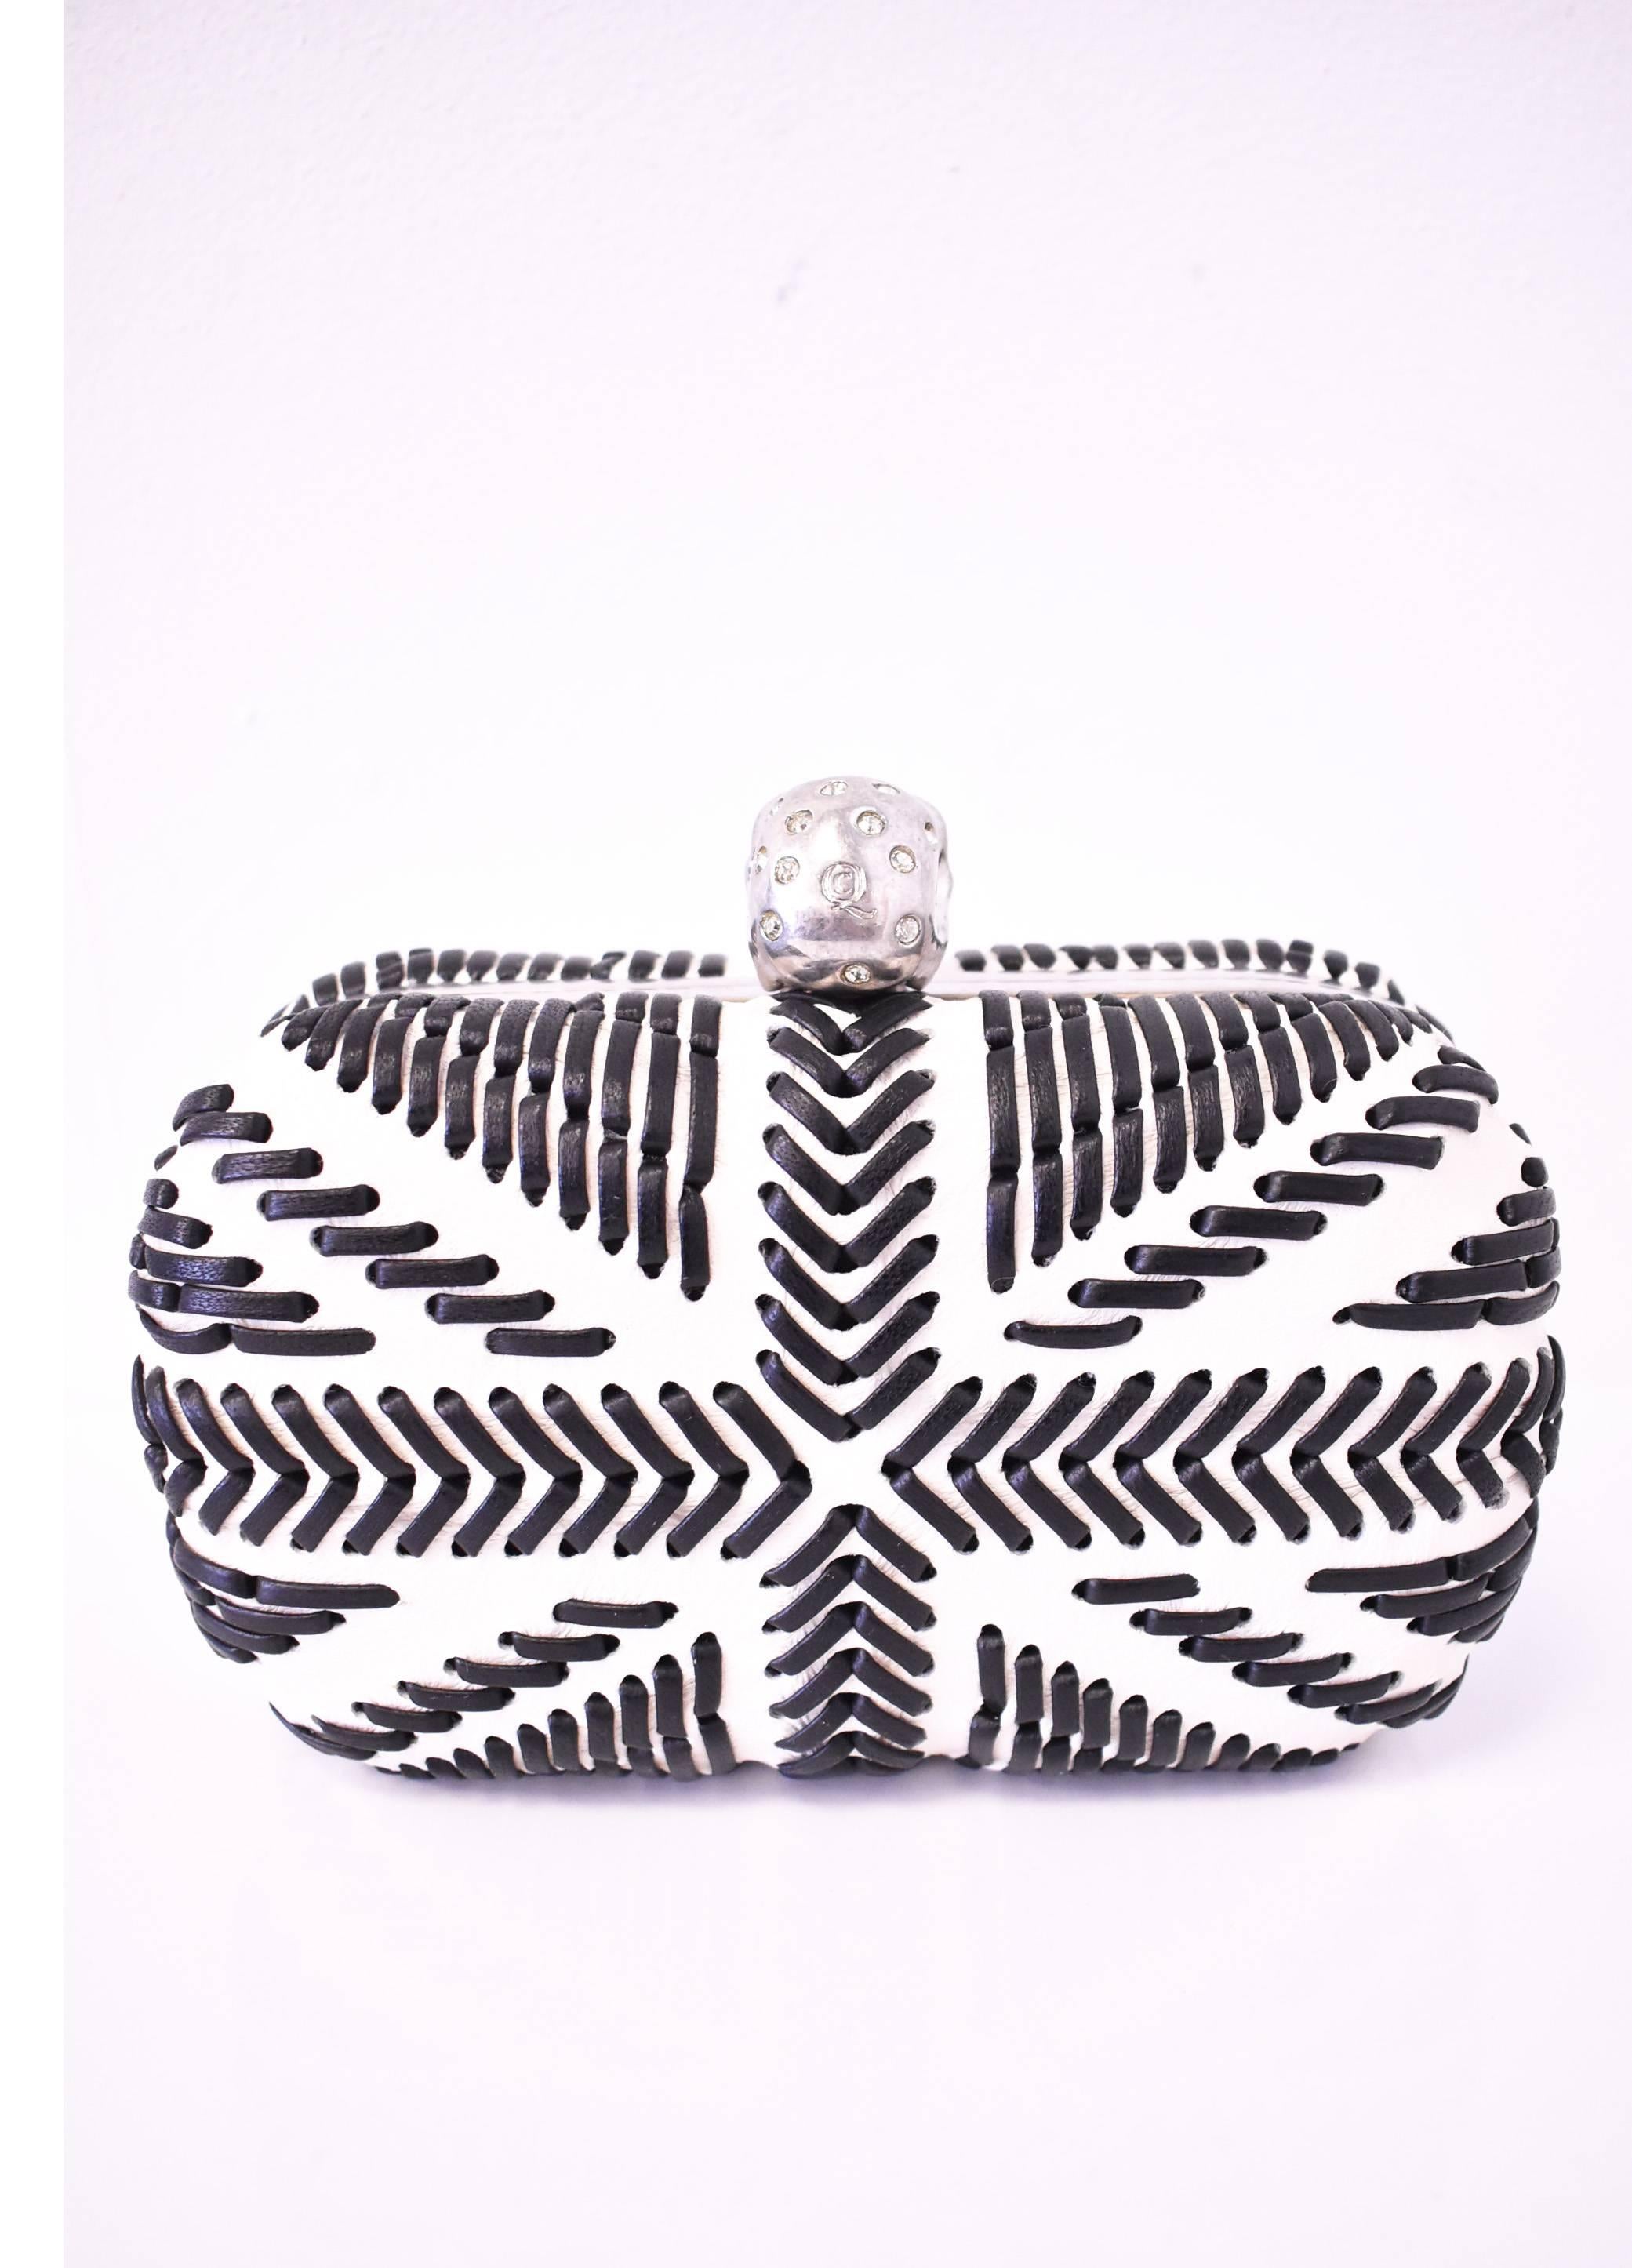 This signature Alexander McQueen box clutch/purse is made of white leather with a black leather whipstitched Union Jack pattern. It features the iconic embellished skull clasp set with pearlescent eyes and crystals. The hard-shell clutch has rounded